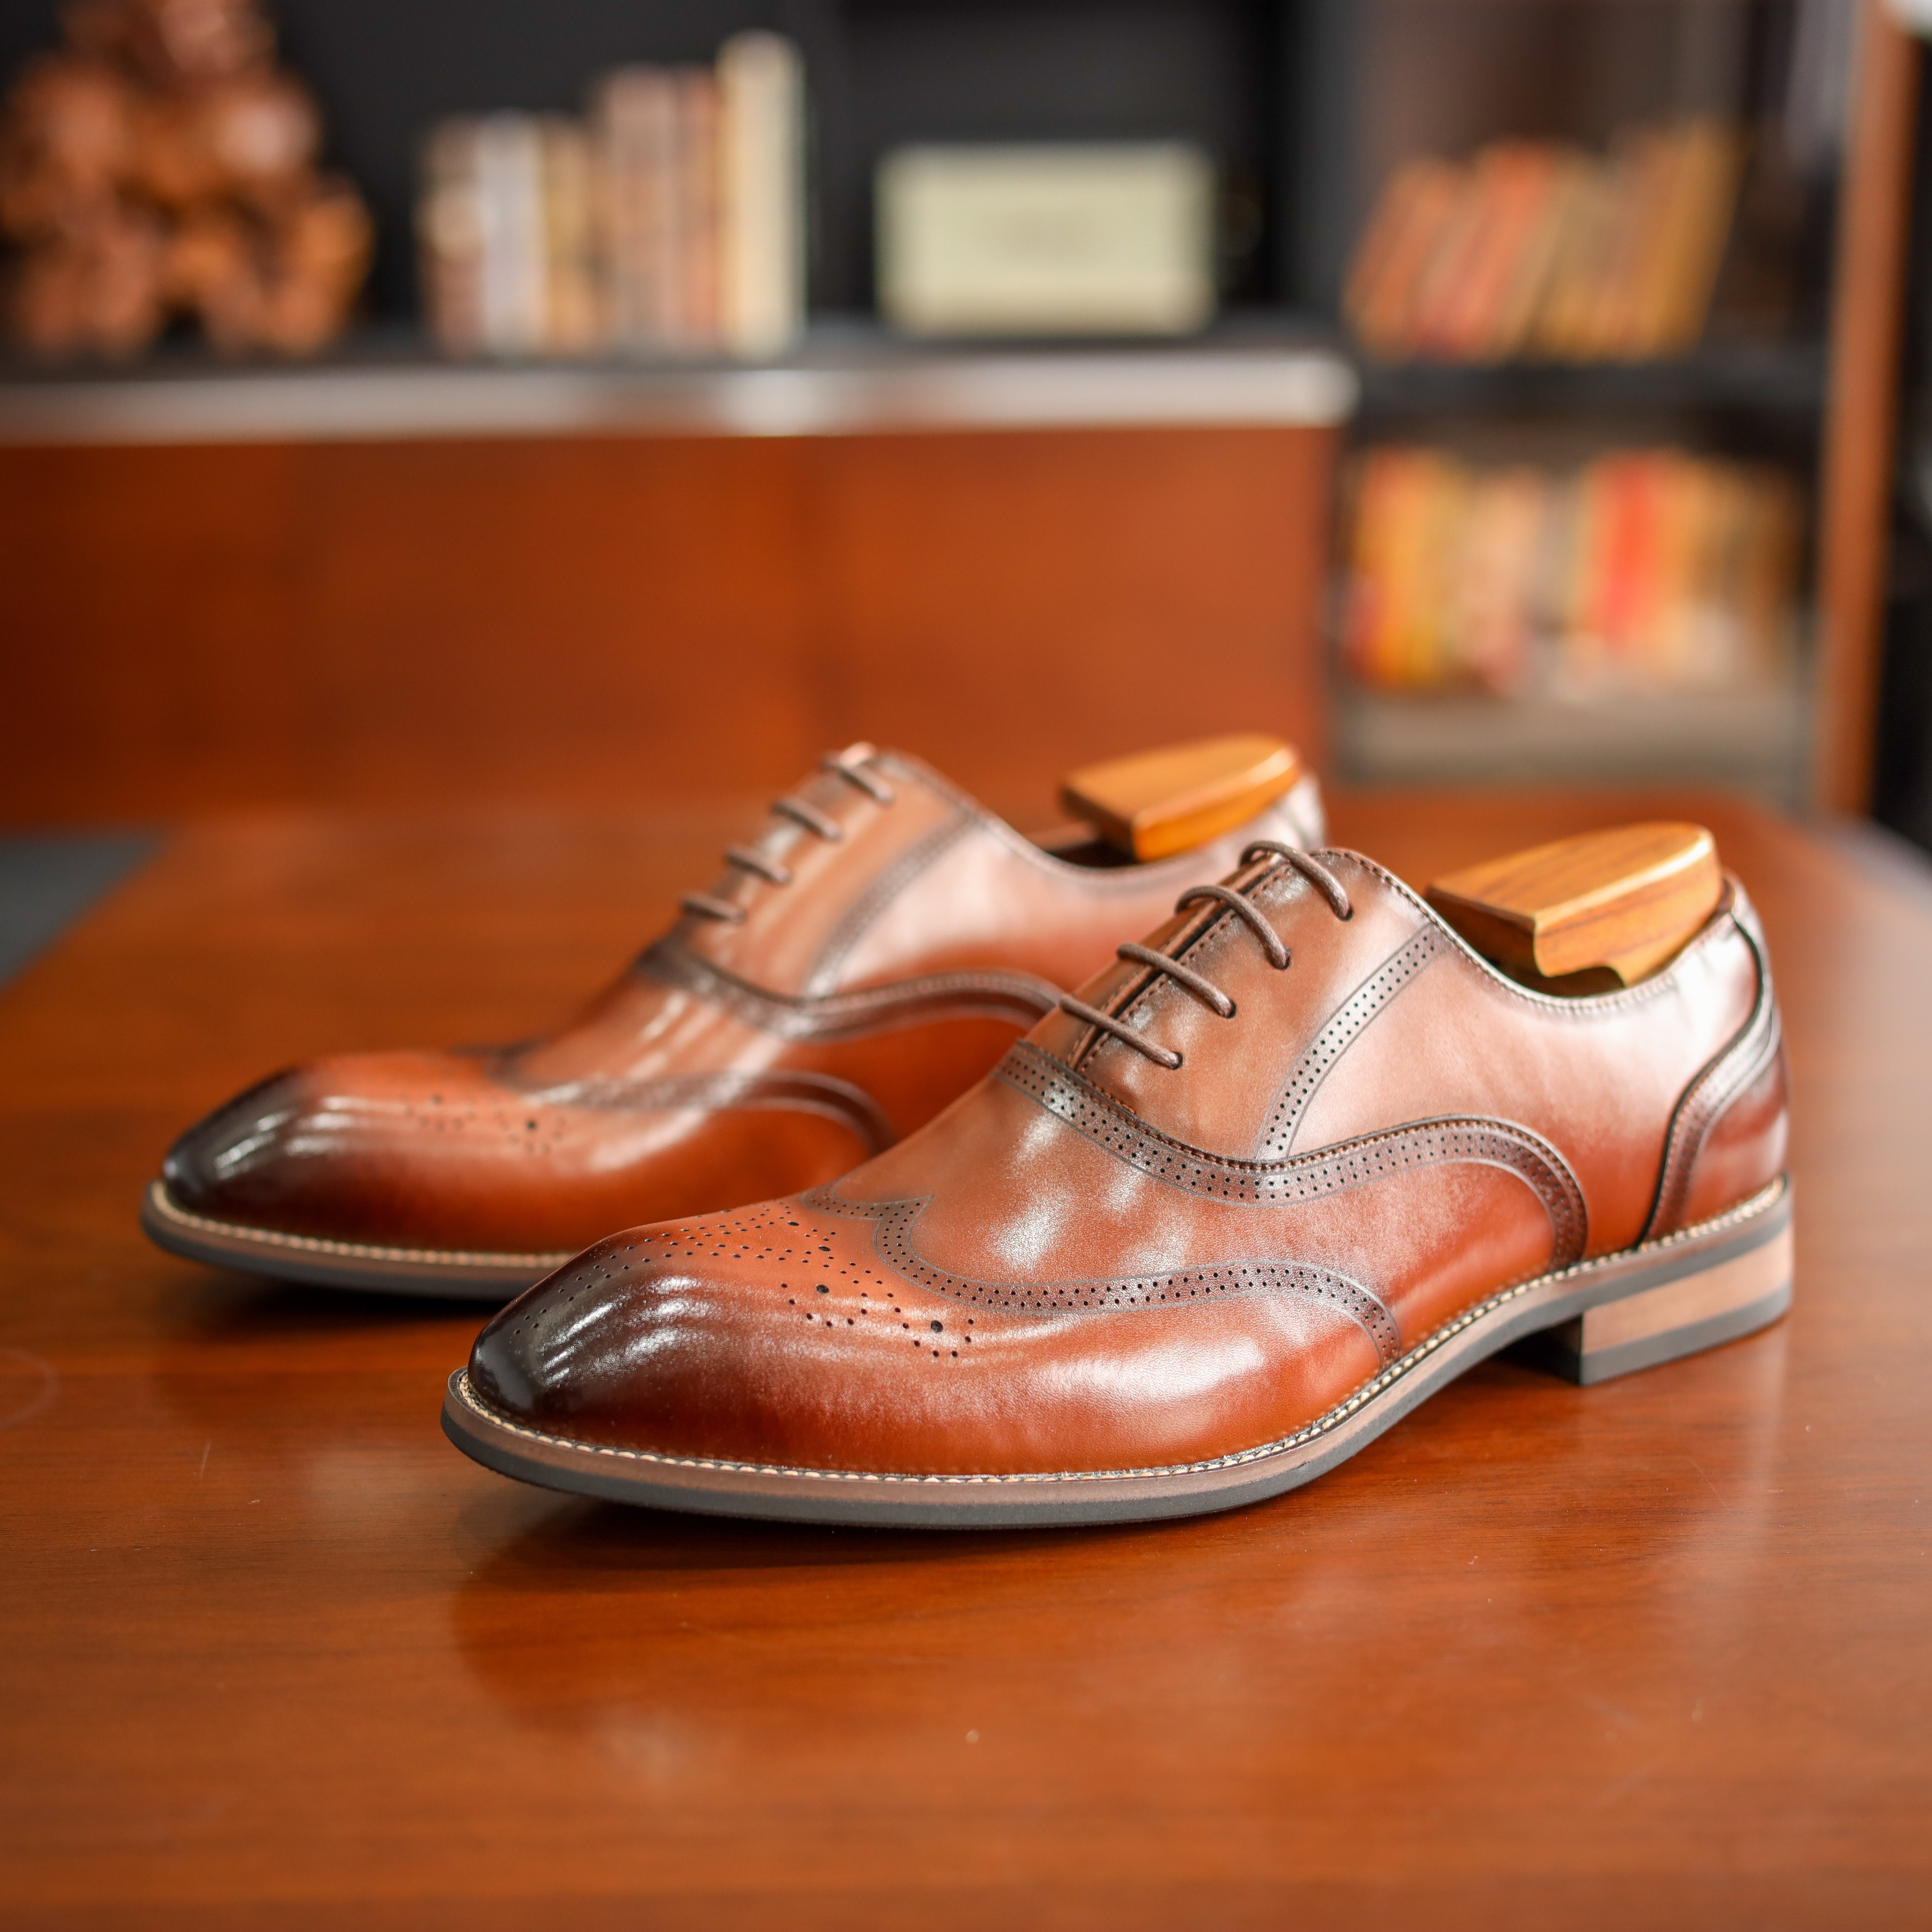 Oxford Brown and White Wingtip Shoes for Mens Italian Dress Shoes